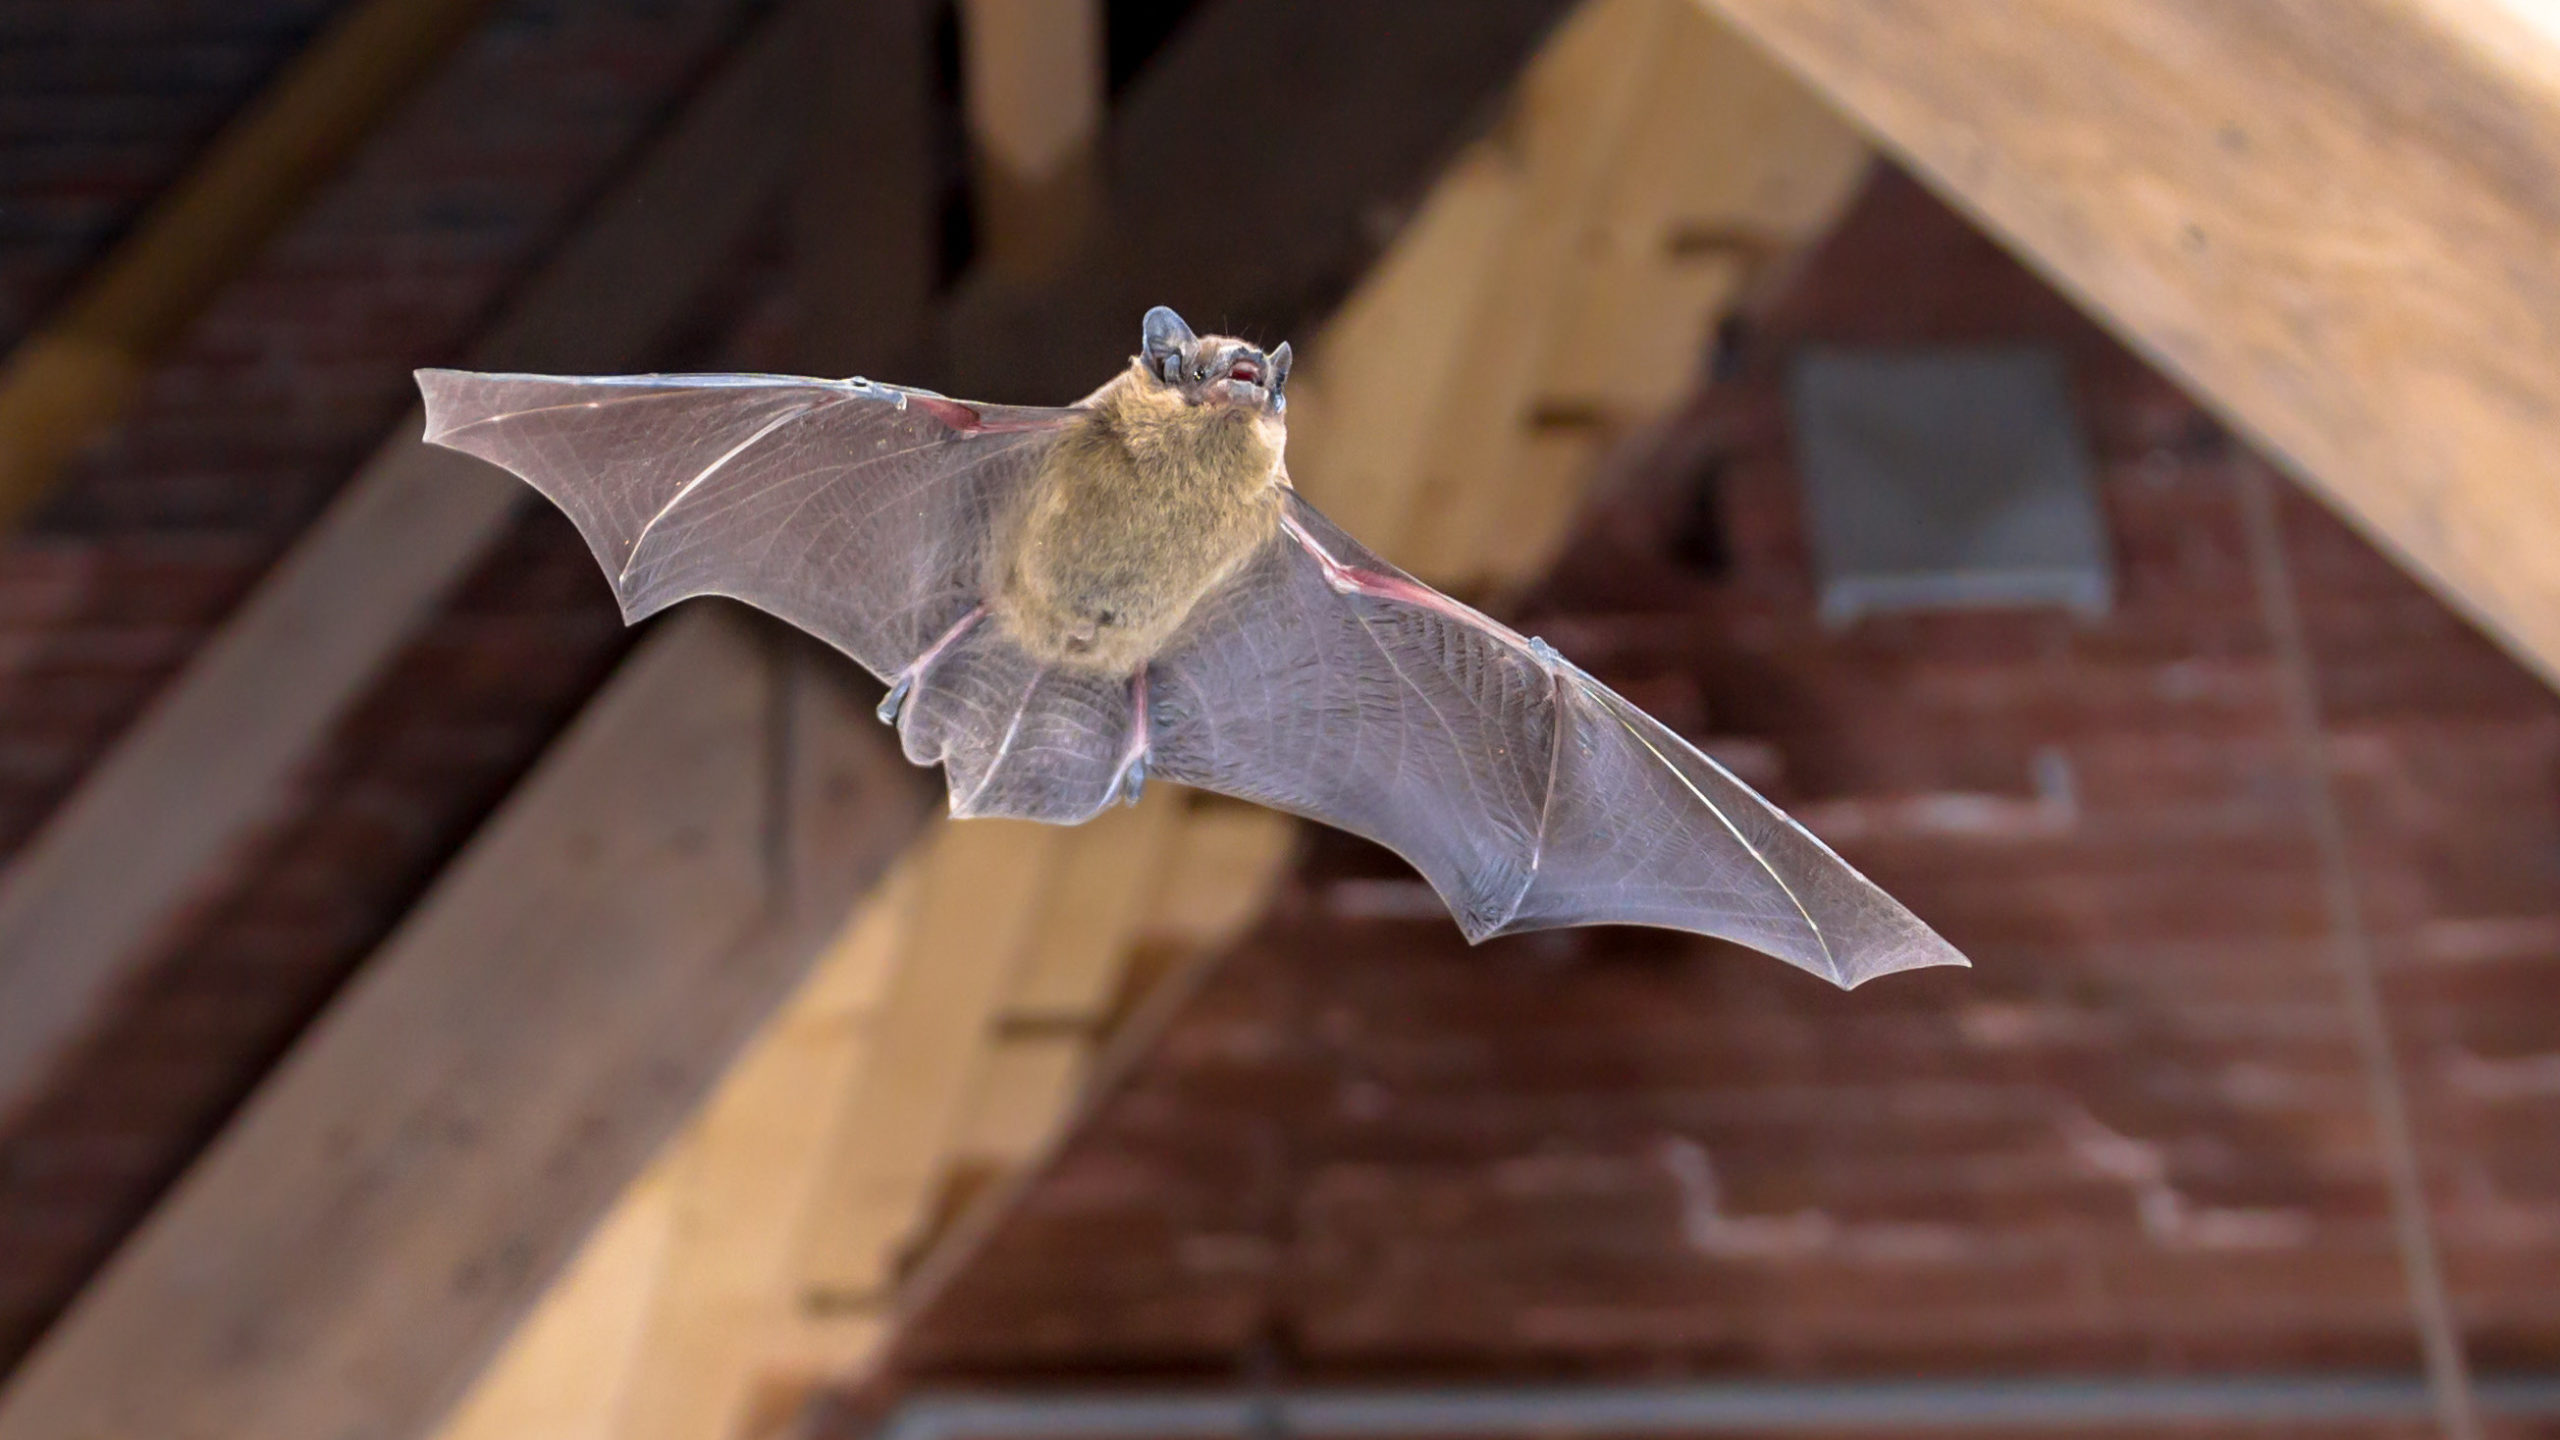 How to Quickly and Calmly Remove a Bat From Inside Your Home